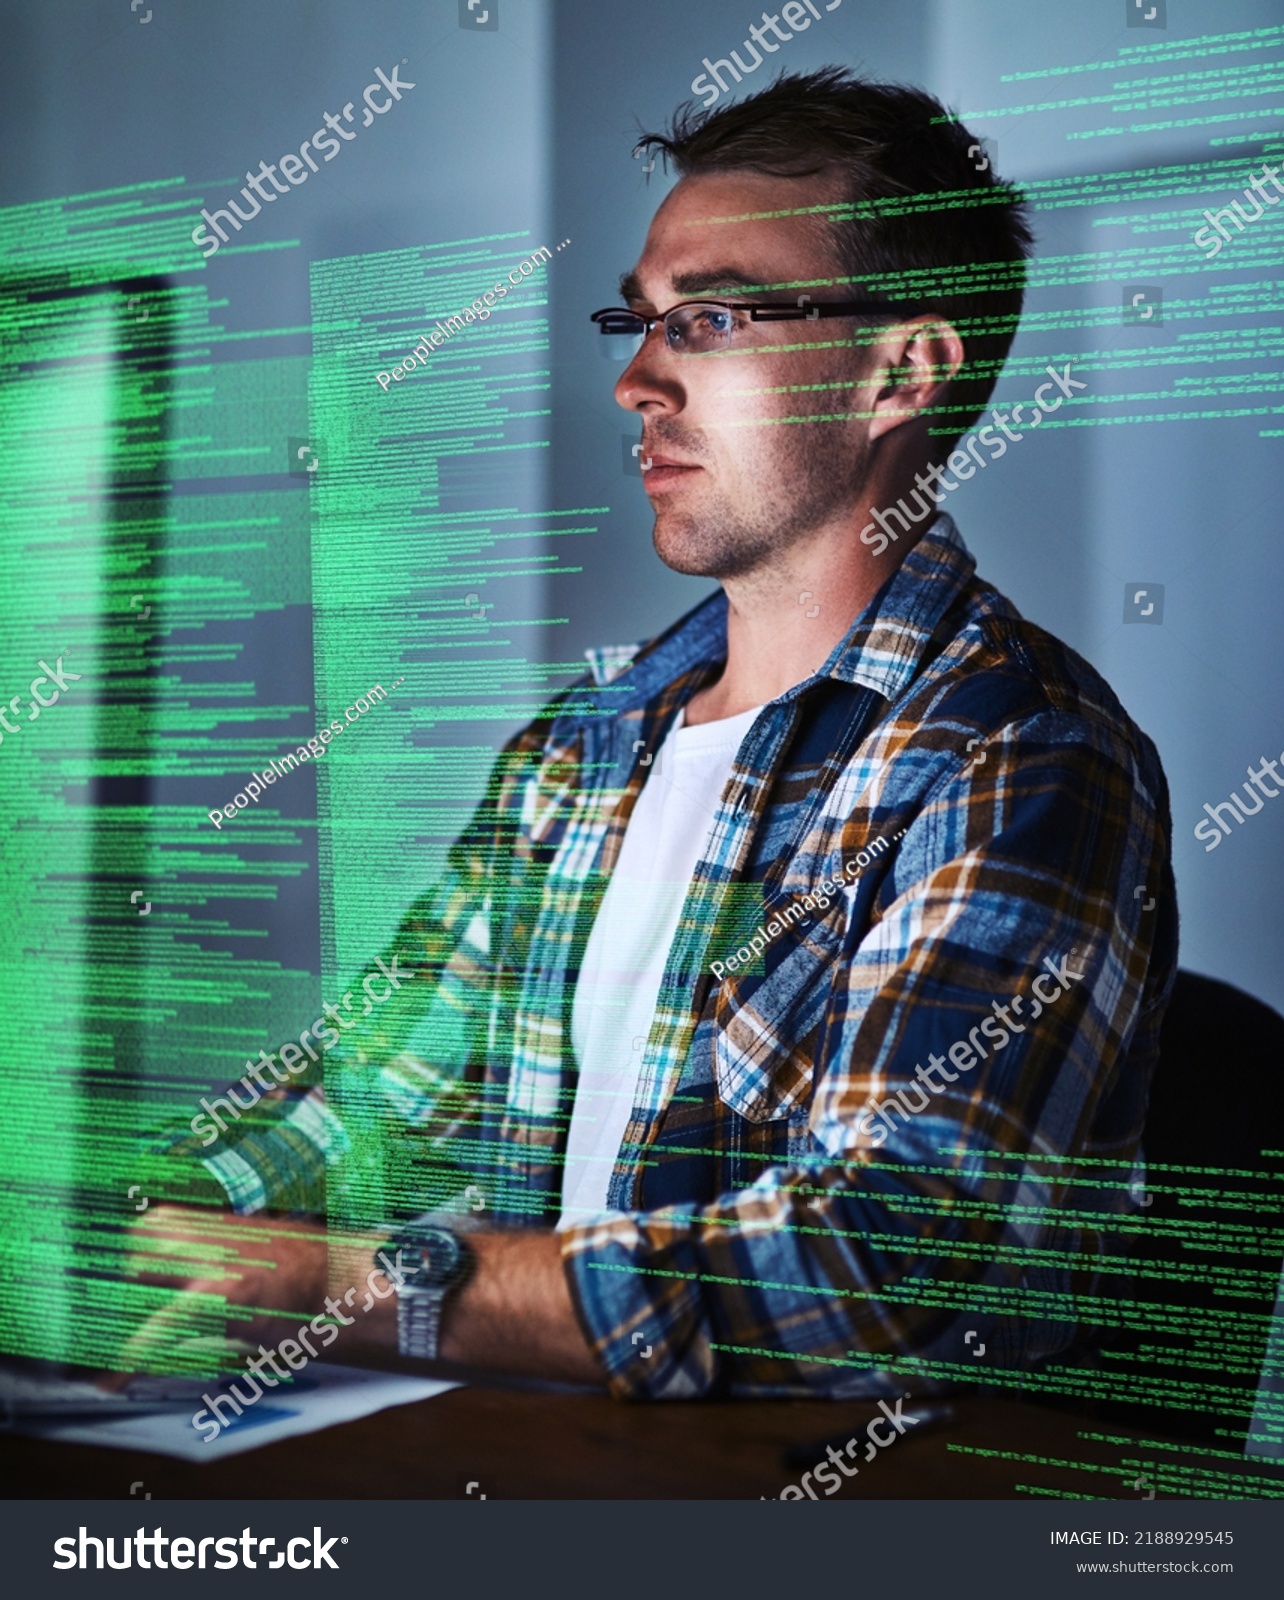 Thinking computer engineer reading cgi code, typing or searching on computer while designing or developing website late at night. Serious web developer planning, coding or innovating website ux or #2188929545